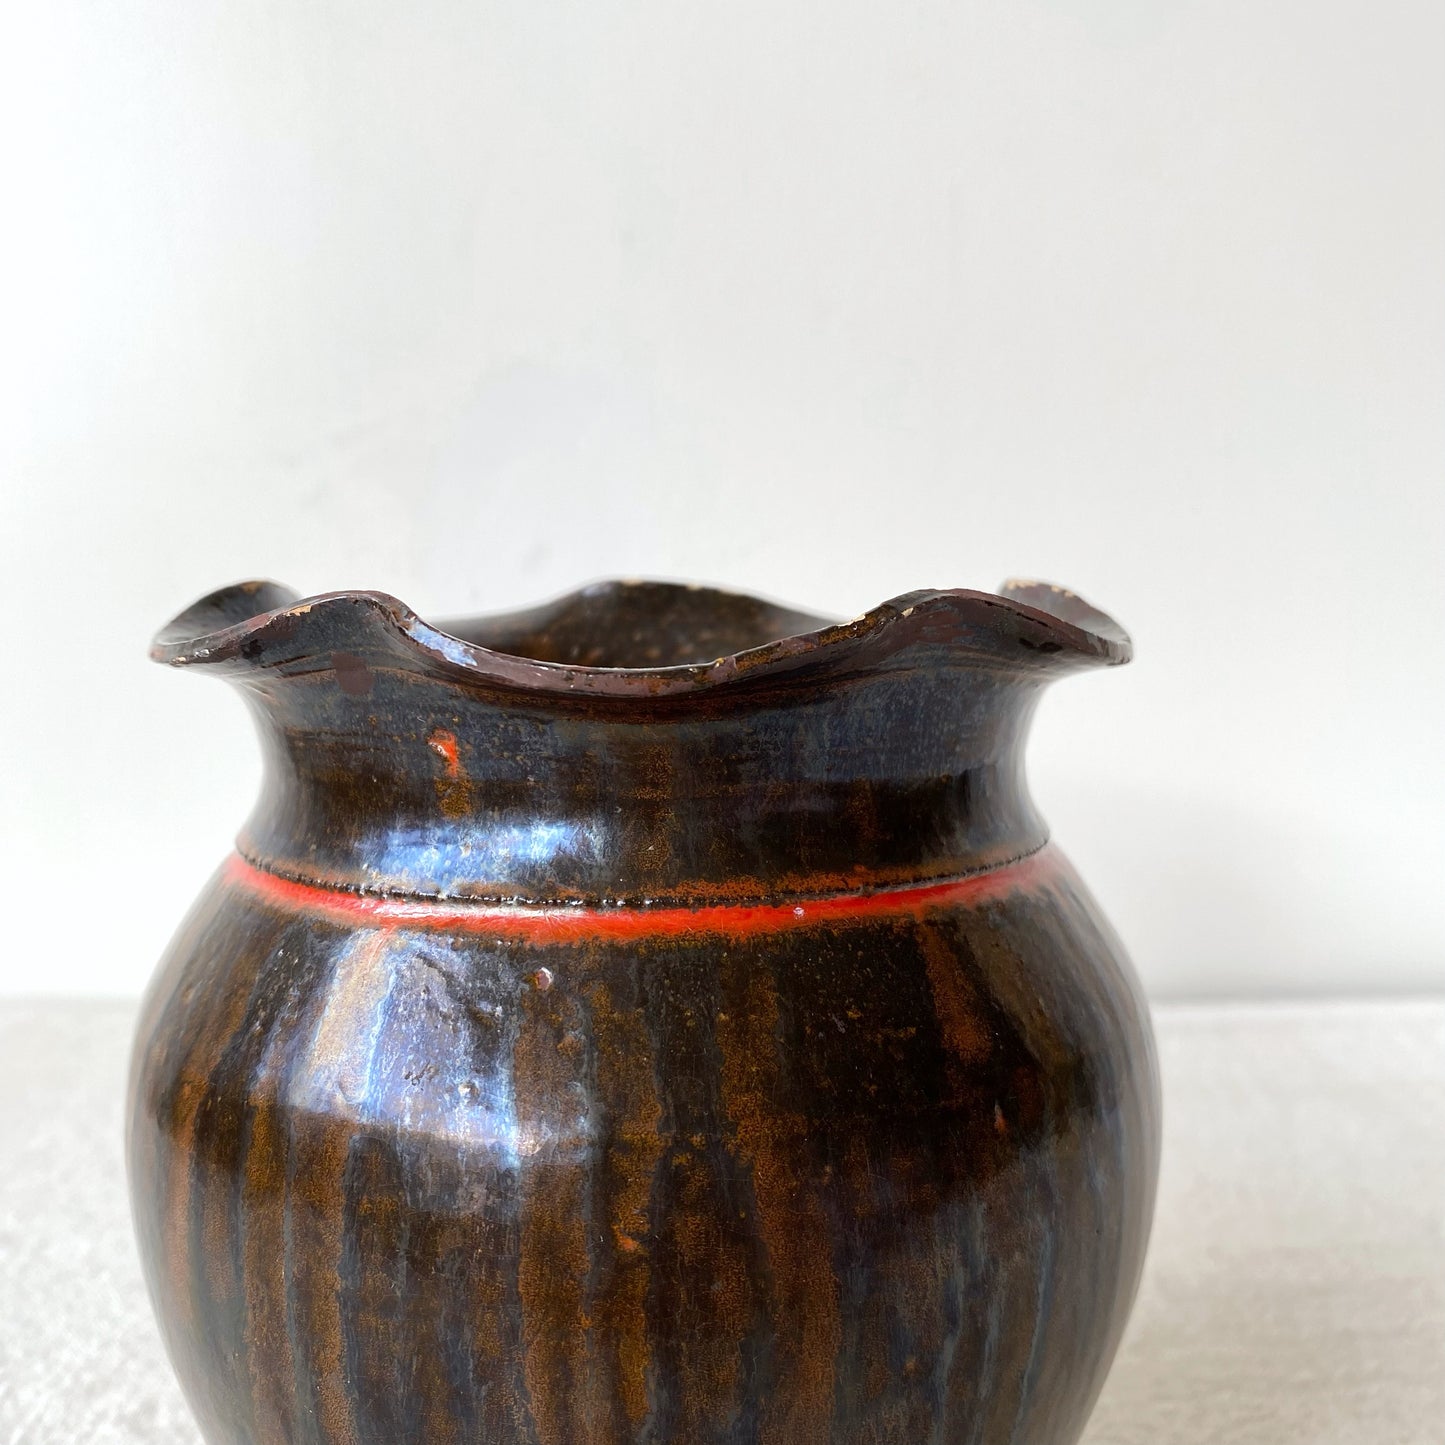 Vintage Black and Red Pottery Vessel with Ruffle Lip